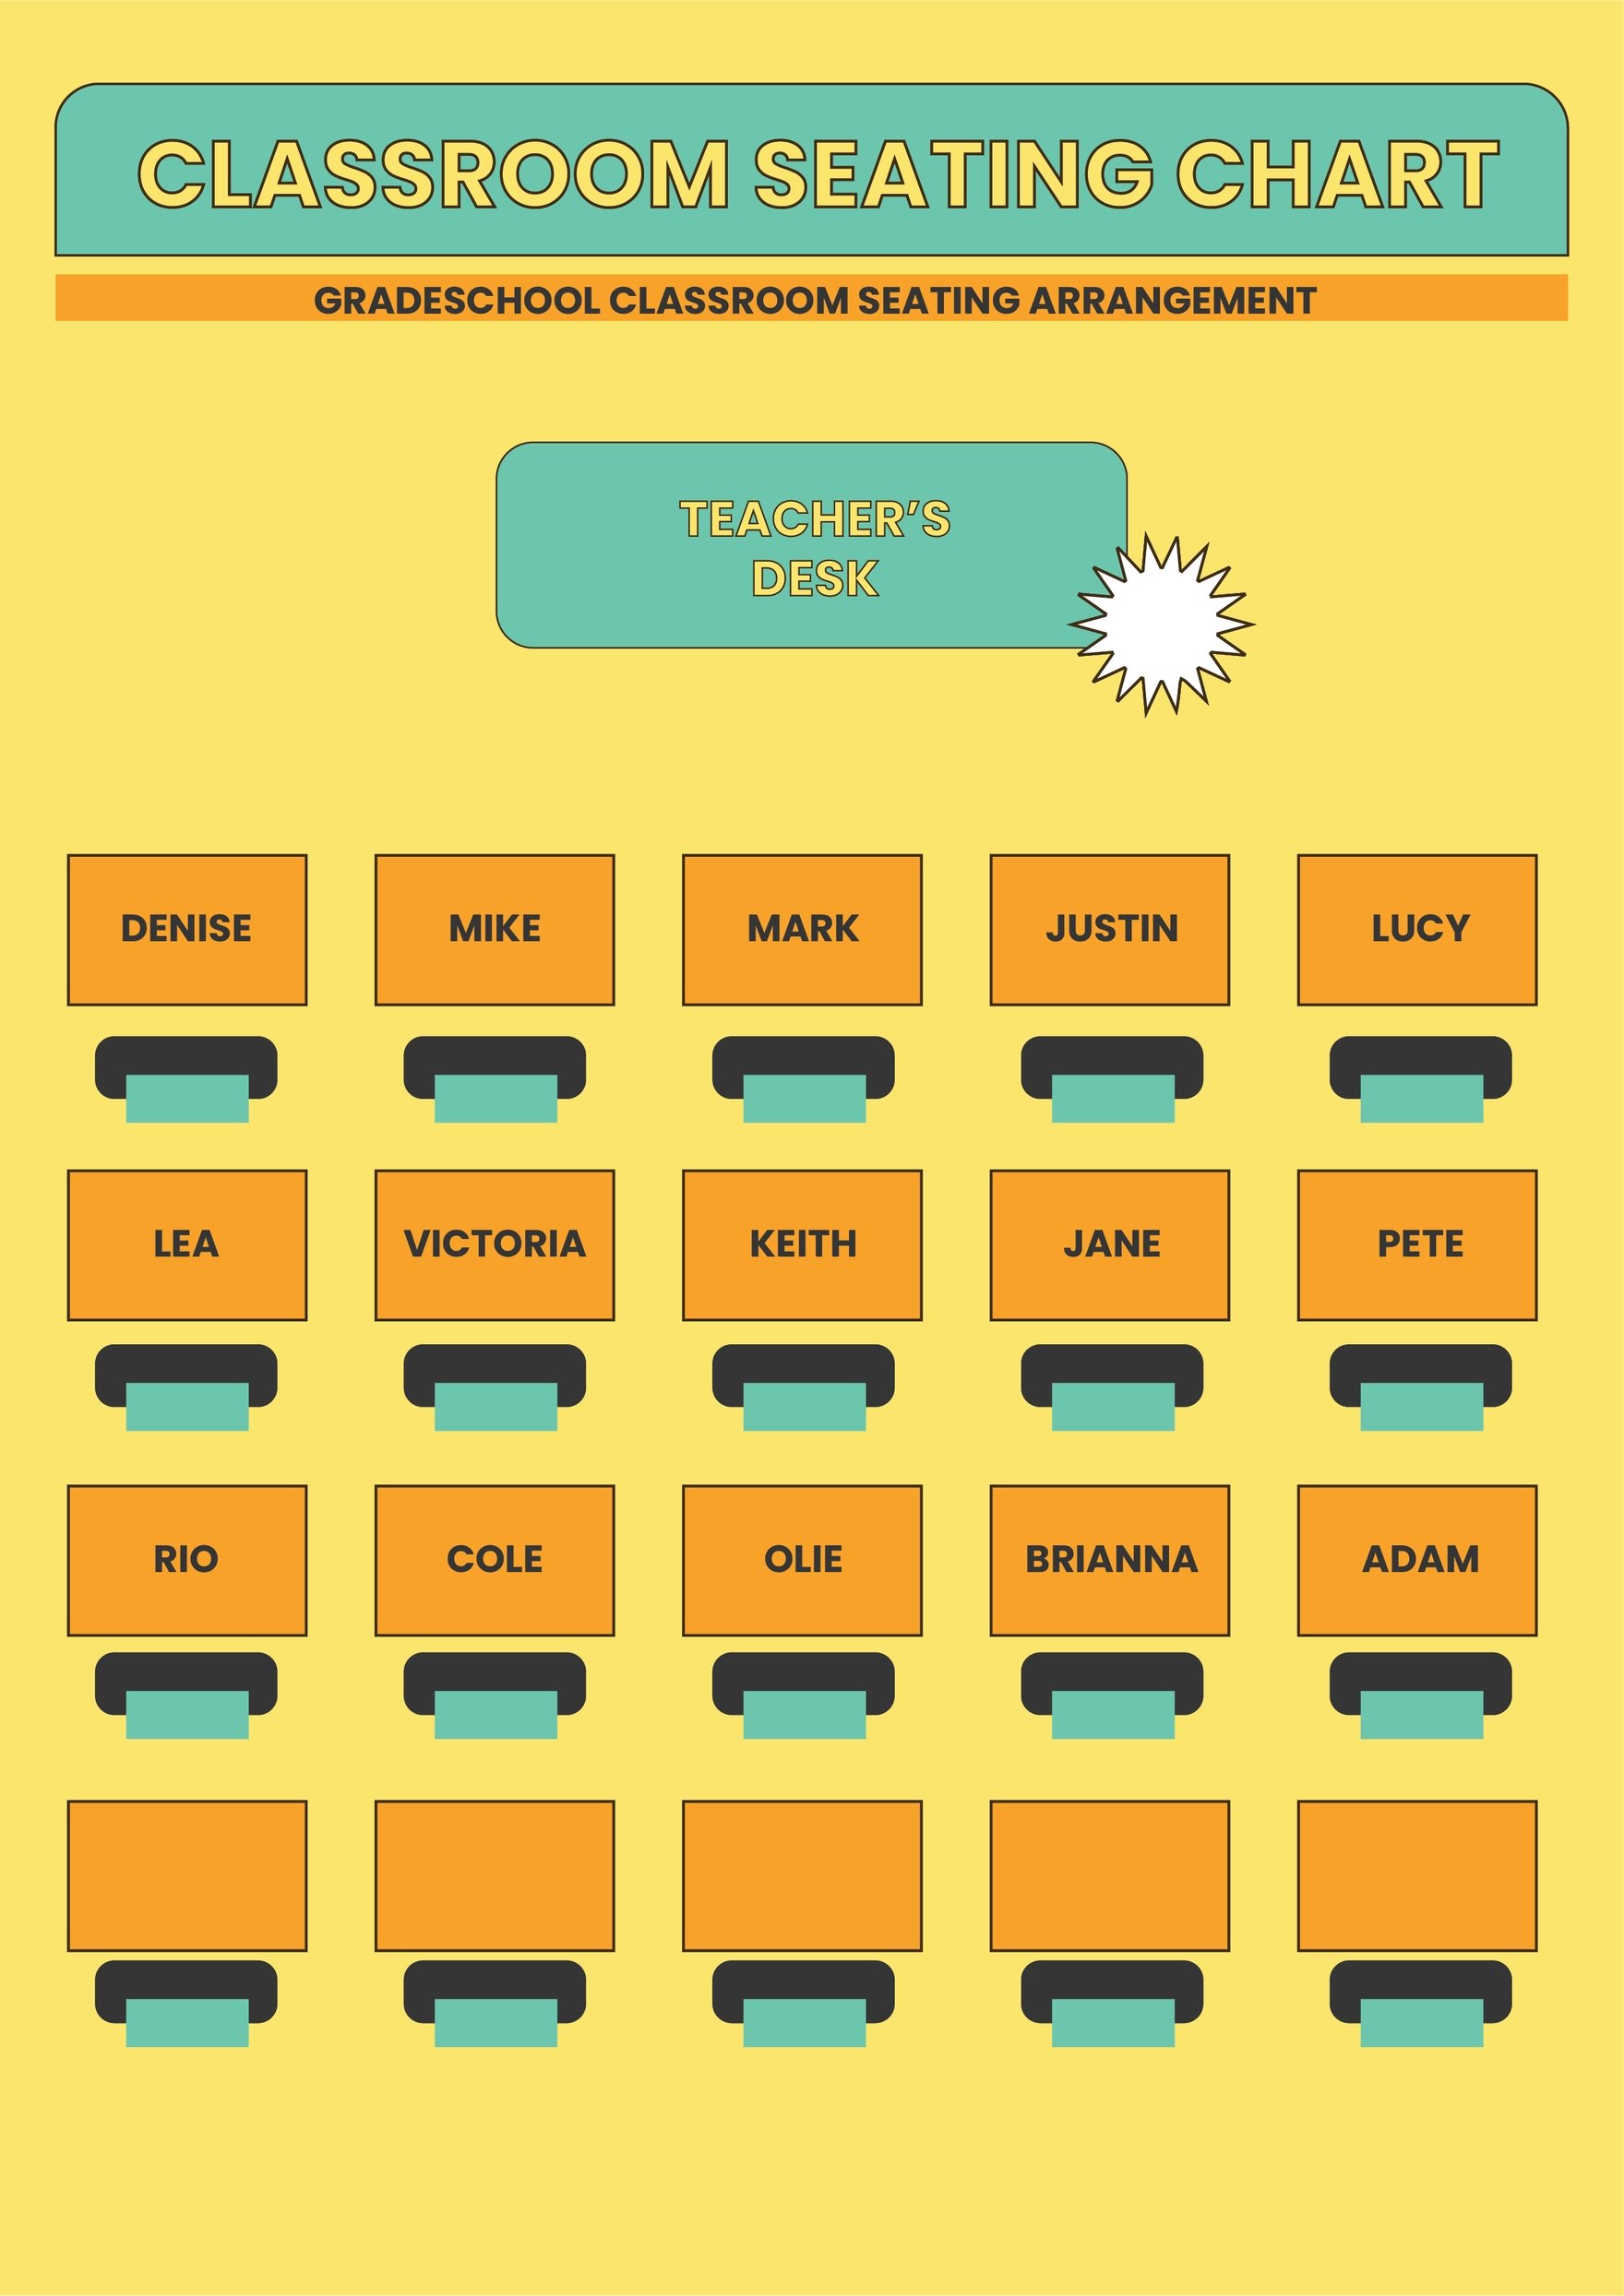 Classroom Seating Chart Download In PDF Illustrator Template